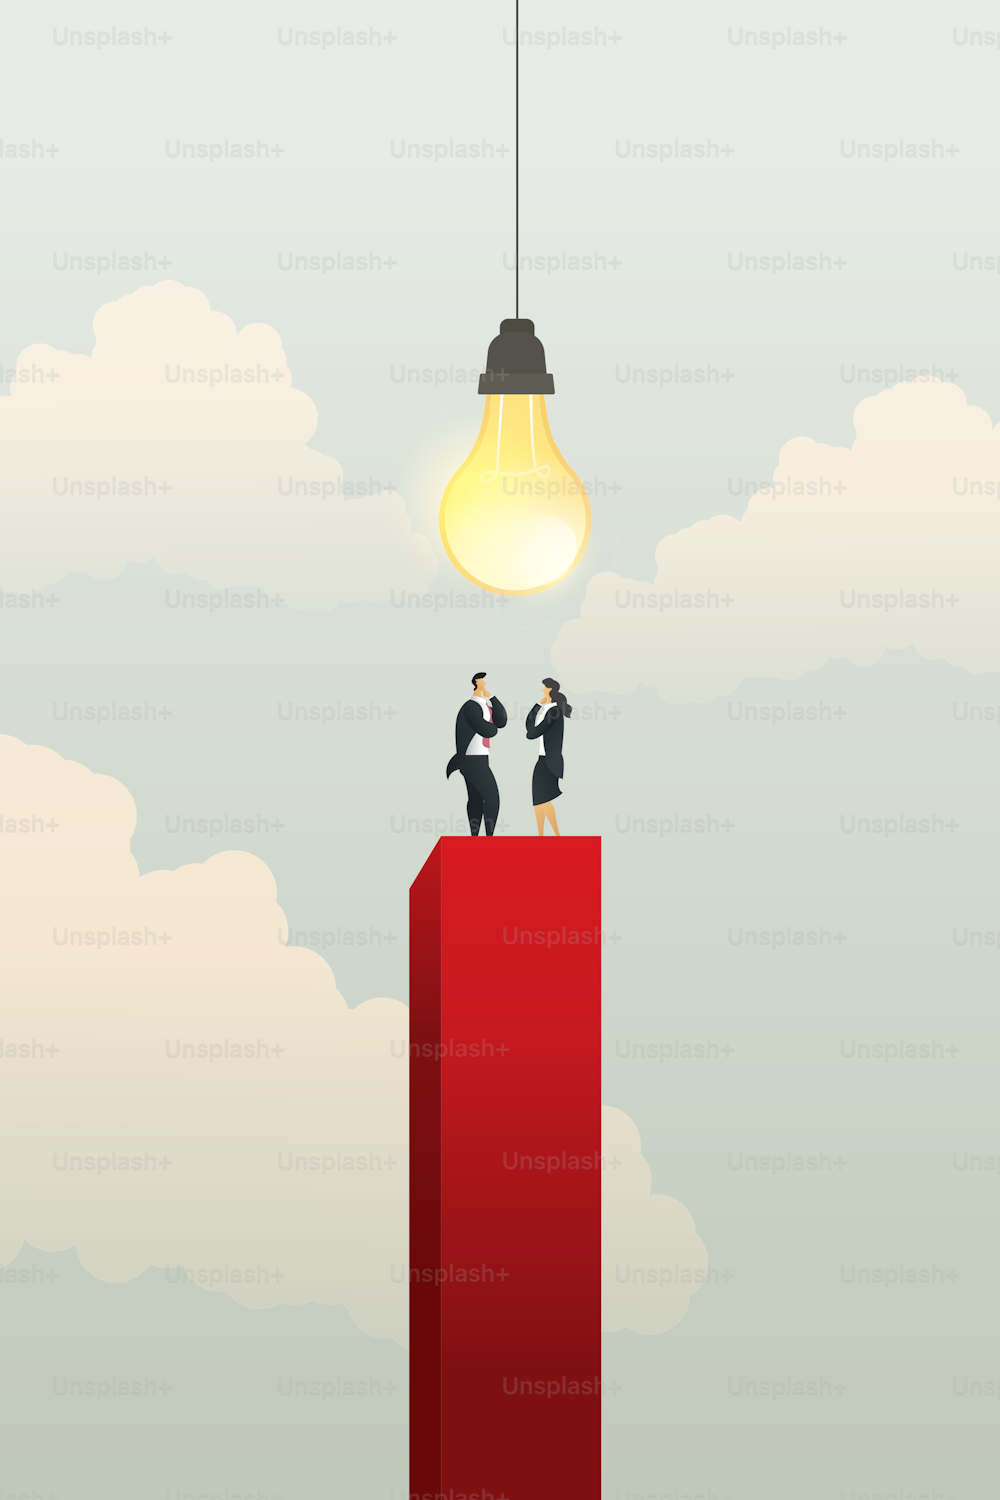 Businessmen and businesswomen Standing on red graph, there bright light bulb. creative business ideas brainstorming or teamwork concept on sky background. illustration vector Eps10